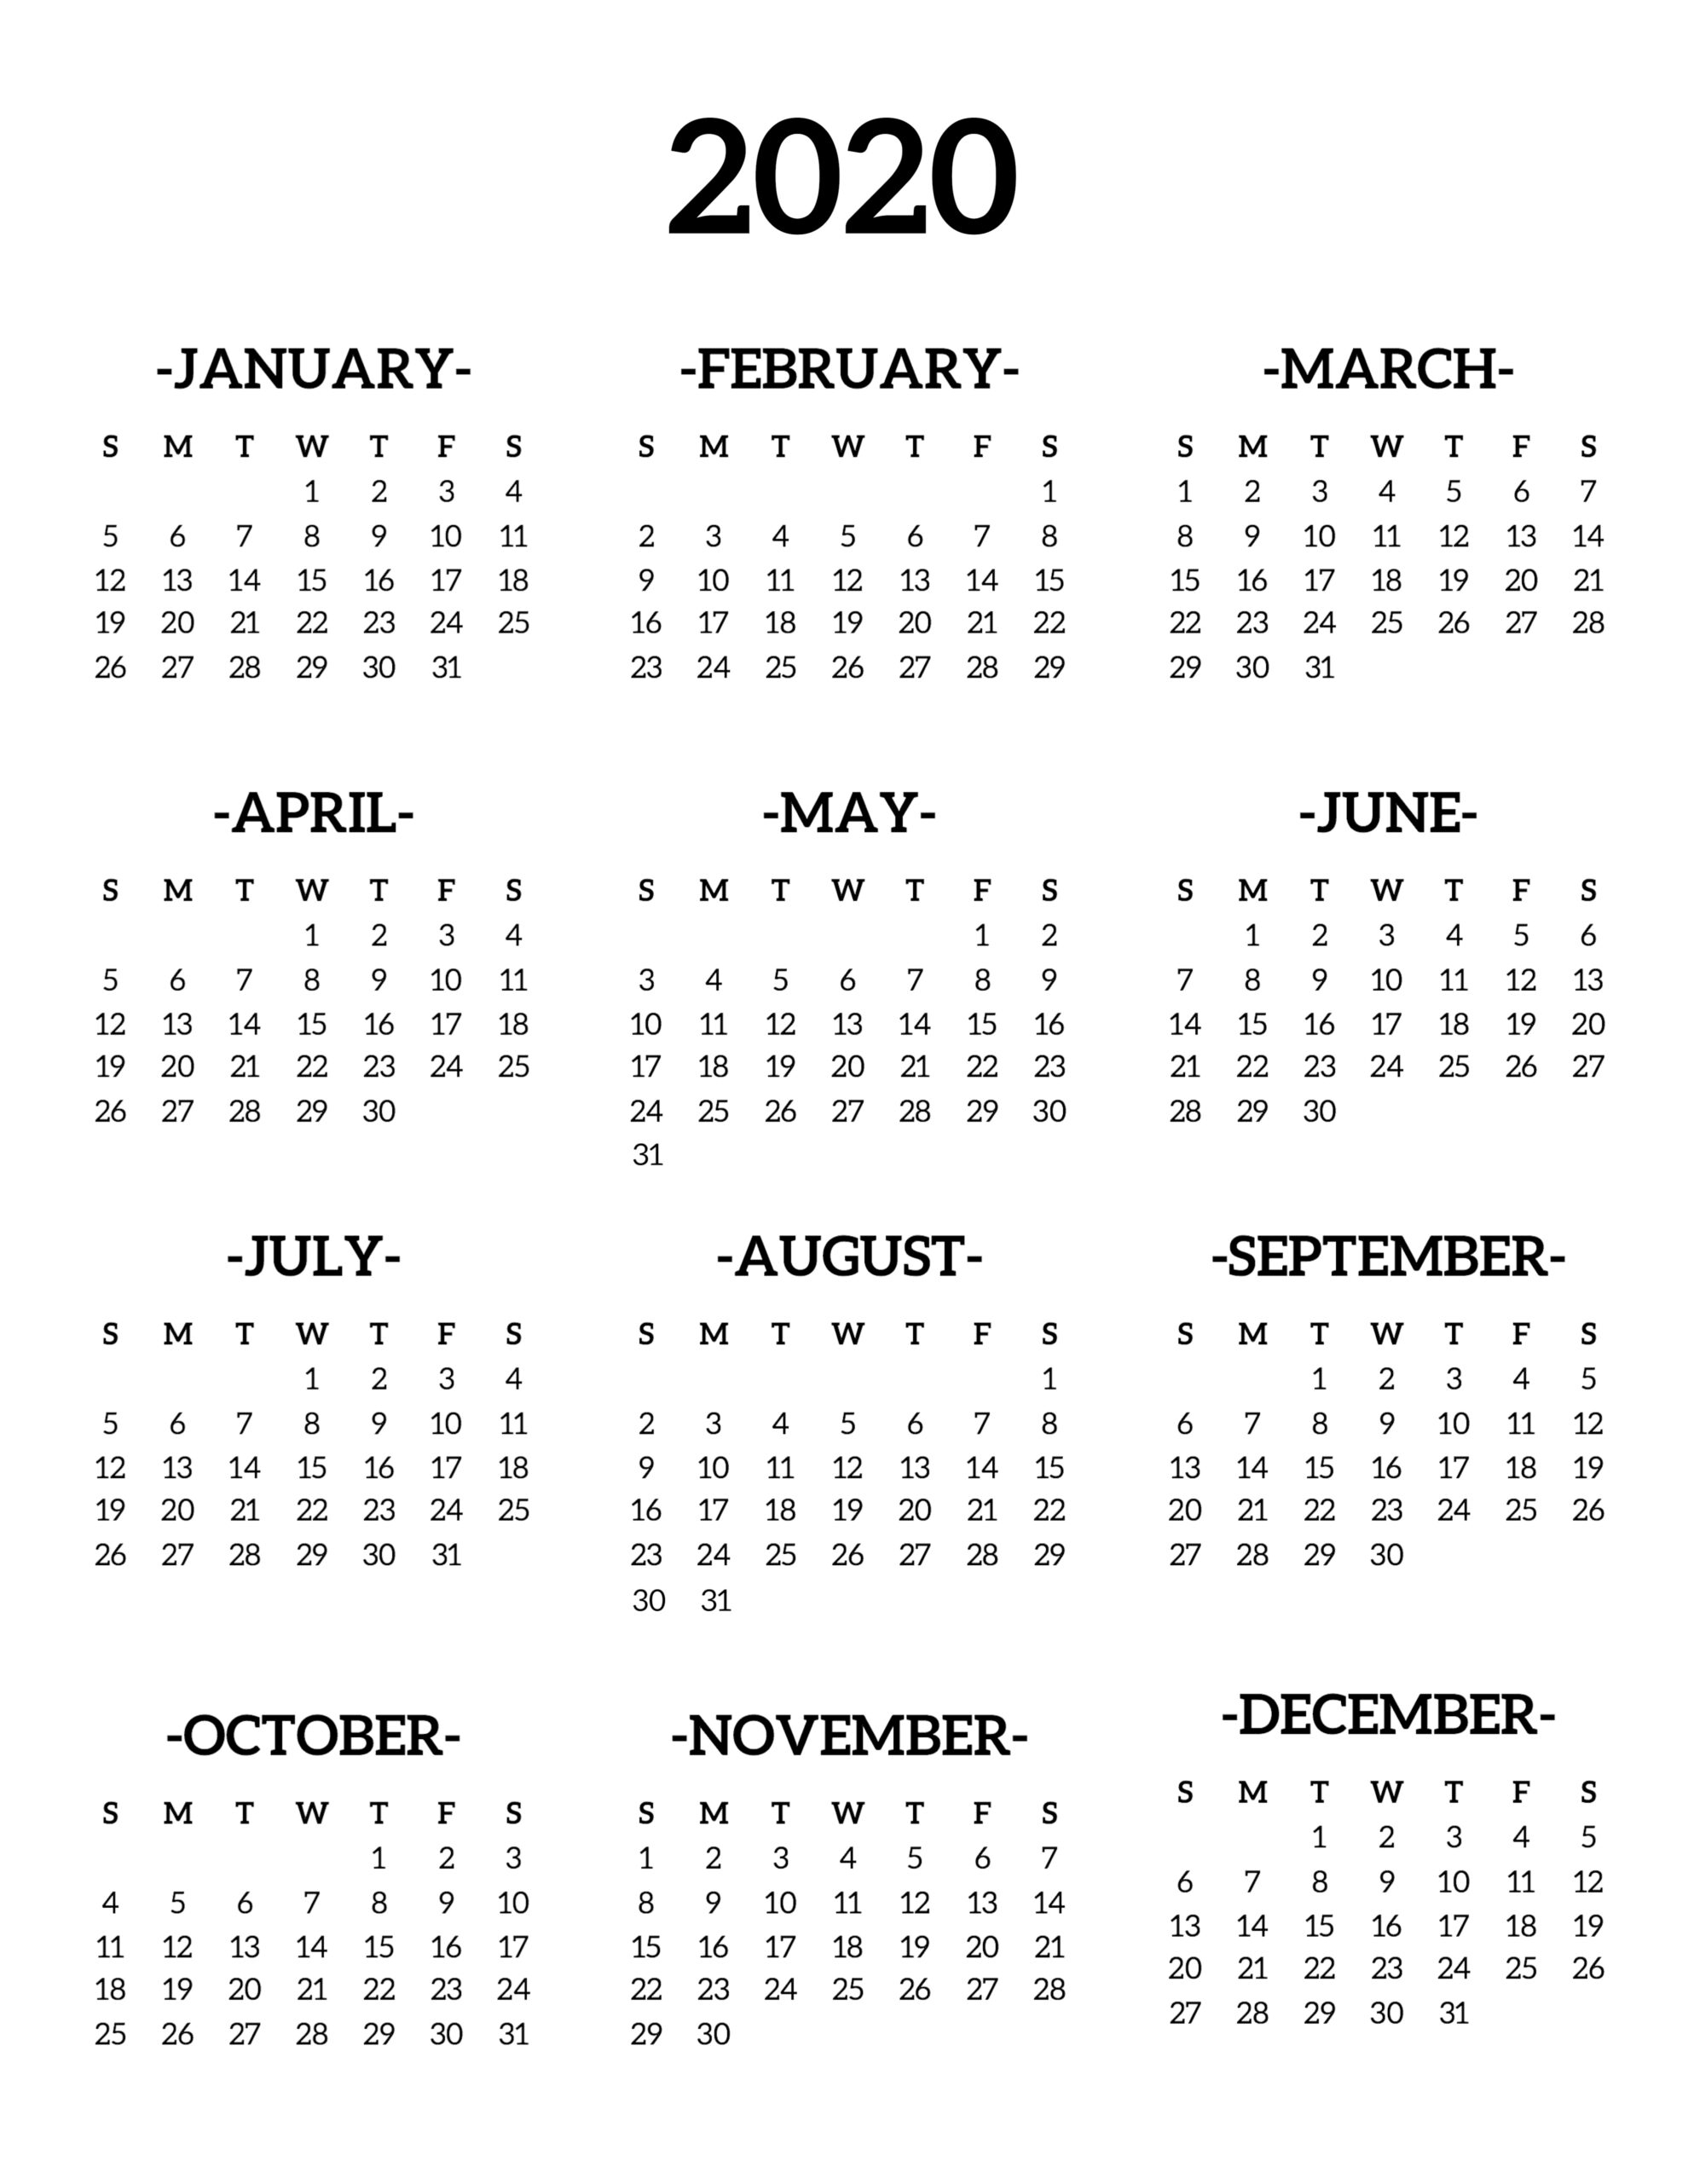 Calendar 2020 Printable One Page - Paper Trail Design pertaining to Yearly Calendar At A Glance Free Printable